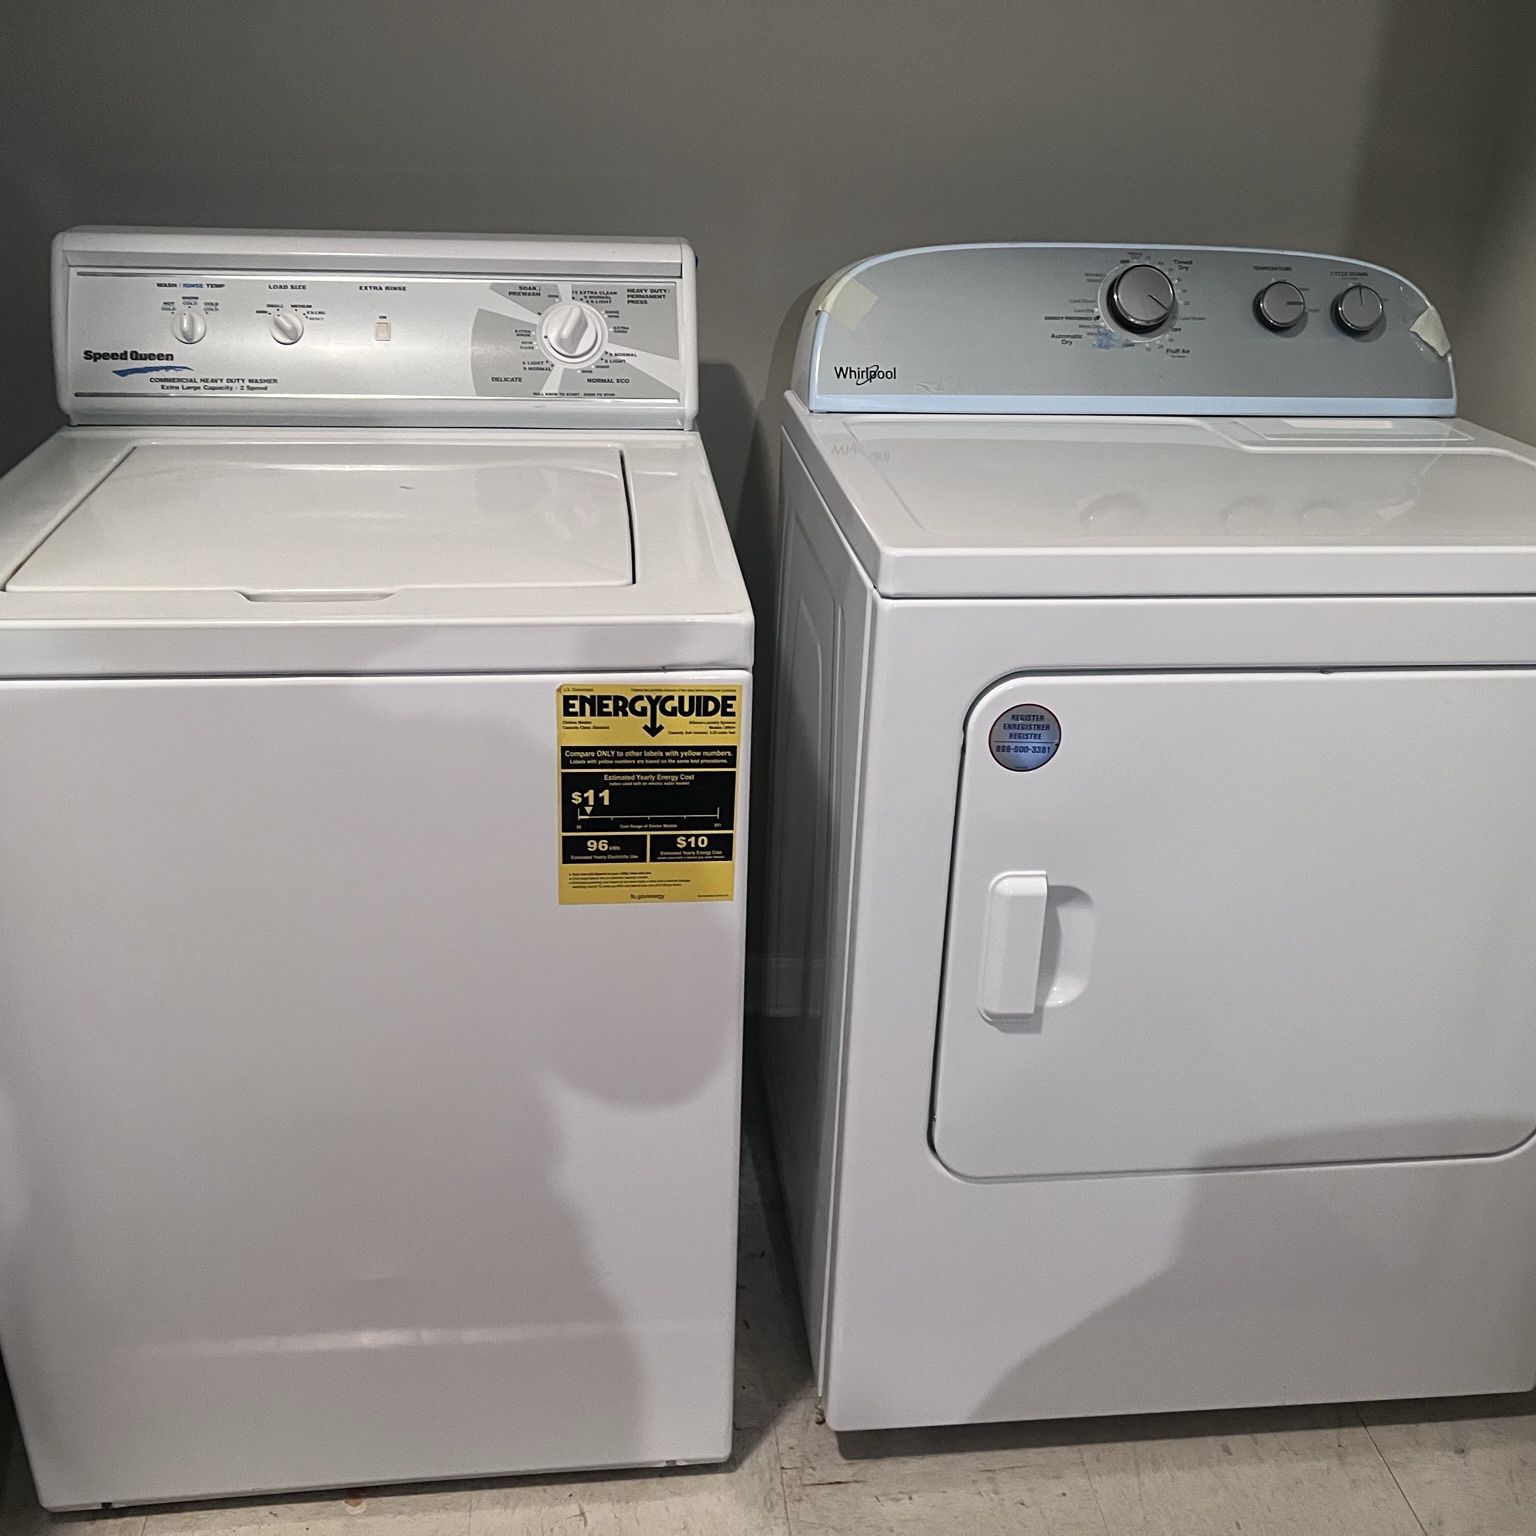 Speed Washer and Whirlpool Dryer